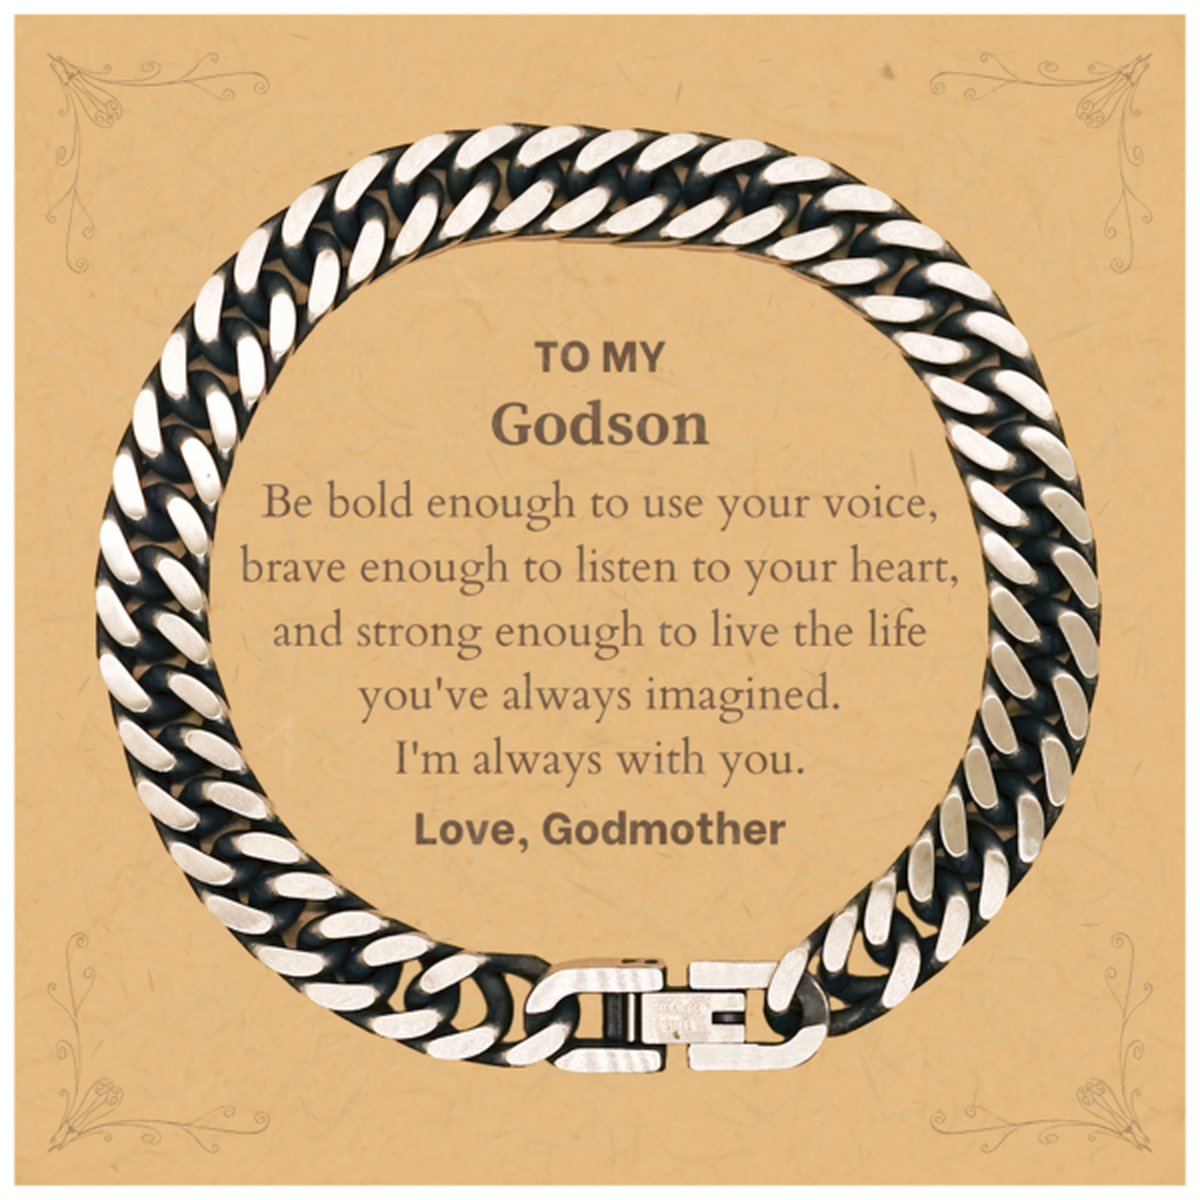 Keepsake Godson Cuban Link Chain Bracelet Gift Idea Graduation Christmas Birthday Godson from Godmother, Godson Be bold enough to use your voice, brave enough to listen to your heart. Love, Godmother